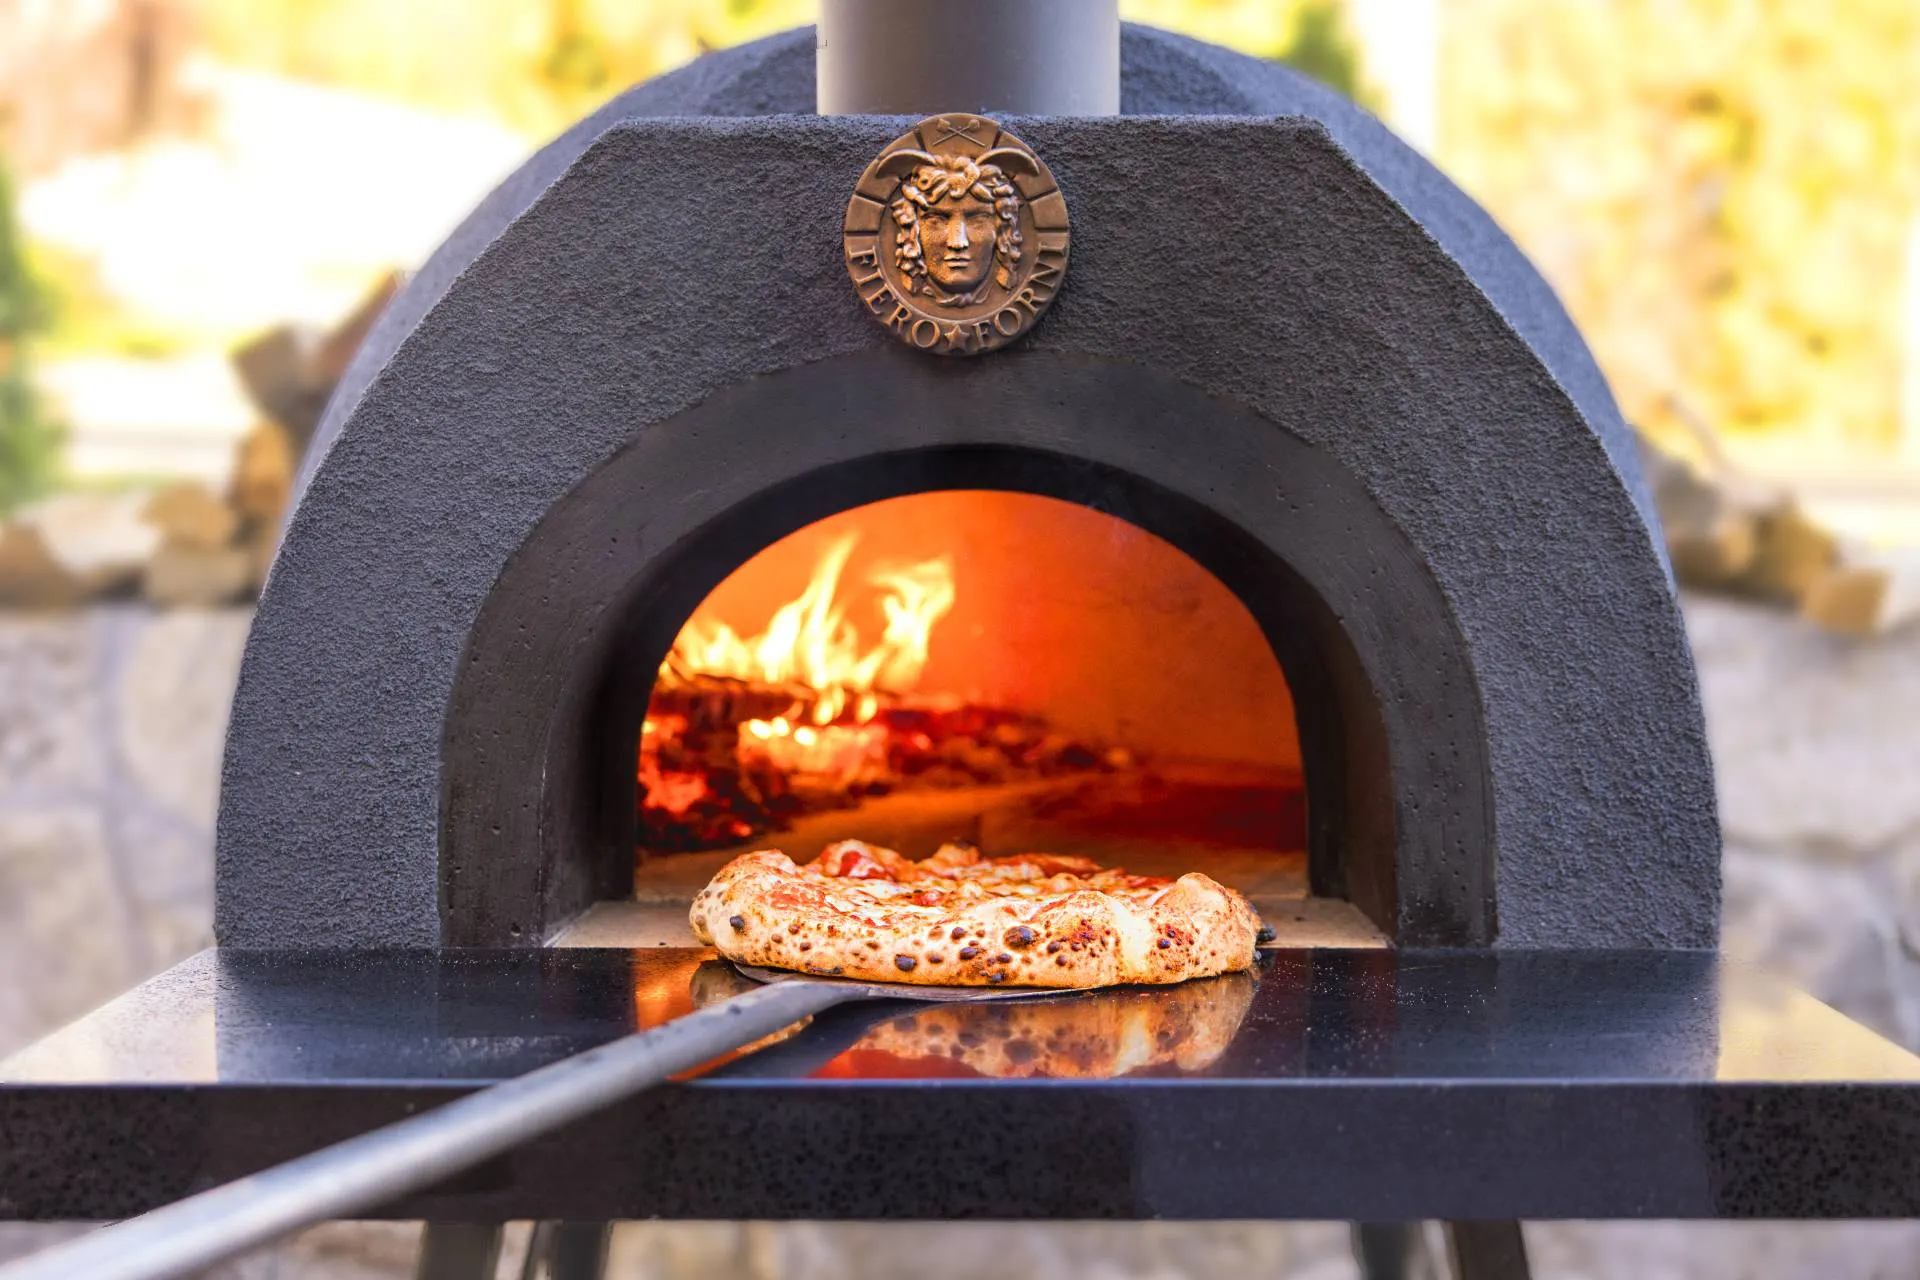  Outdoor Pizza Oven aidpiza 12 Wood Pellet Pizza Ovens